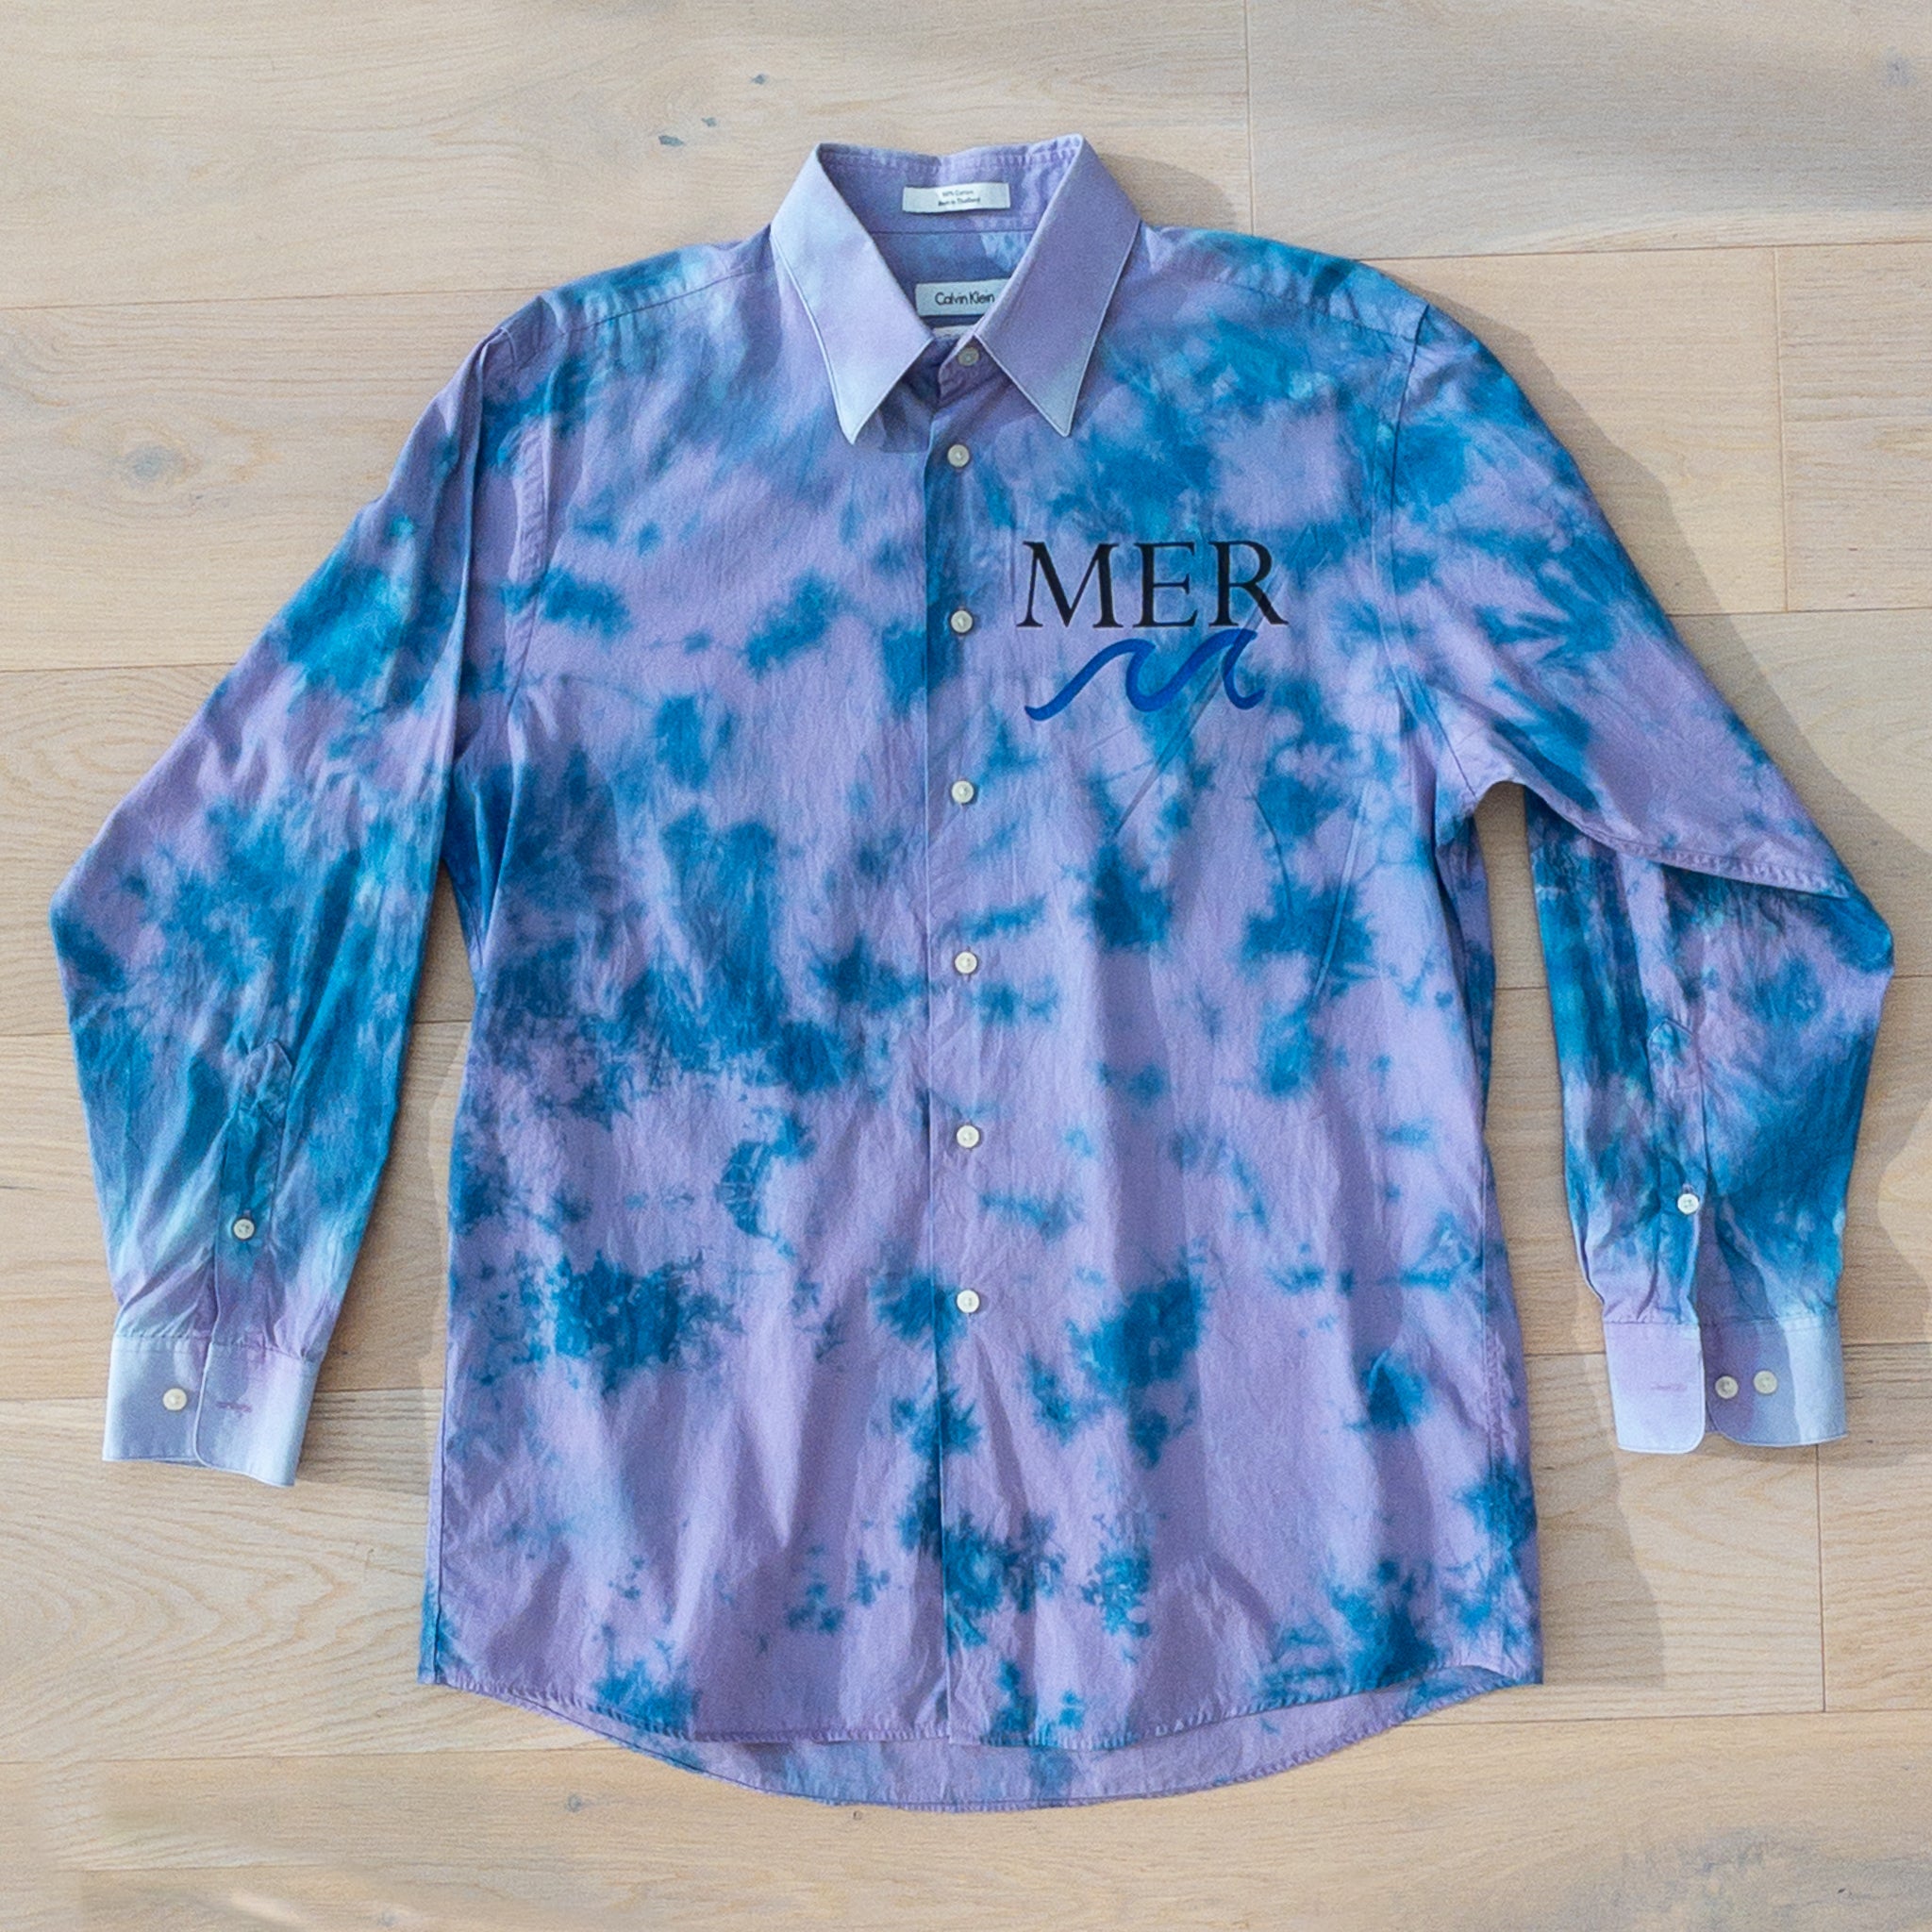 "La Mer Violet" Upcycled Button Up Shirt